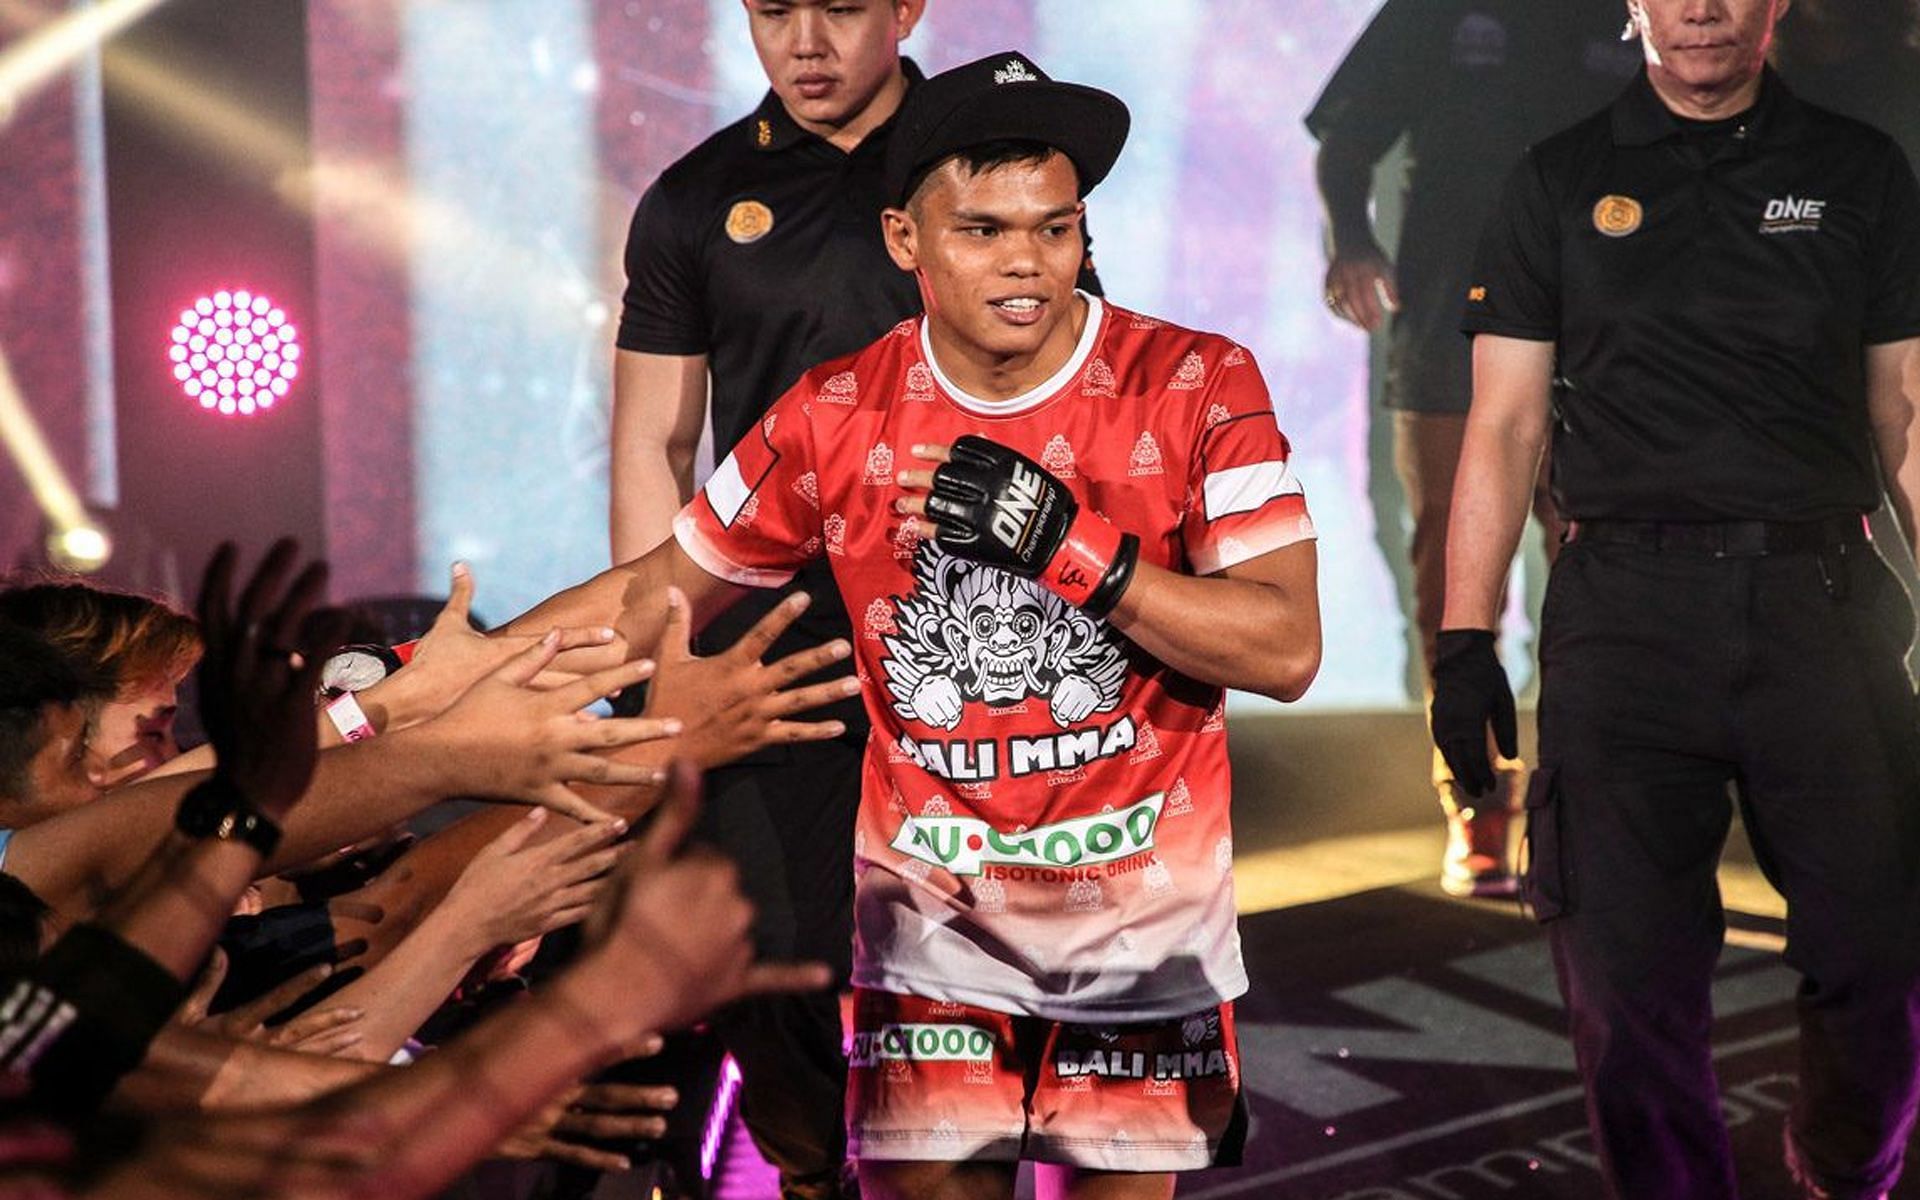 Elipitua Siregar made it to the world stage drawing inspiration from his family. | [Photo: ONE Championship]